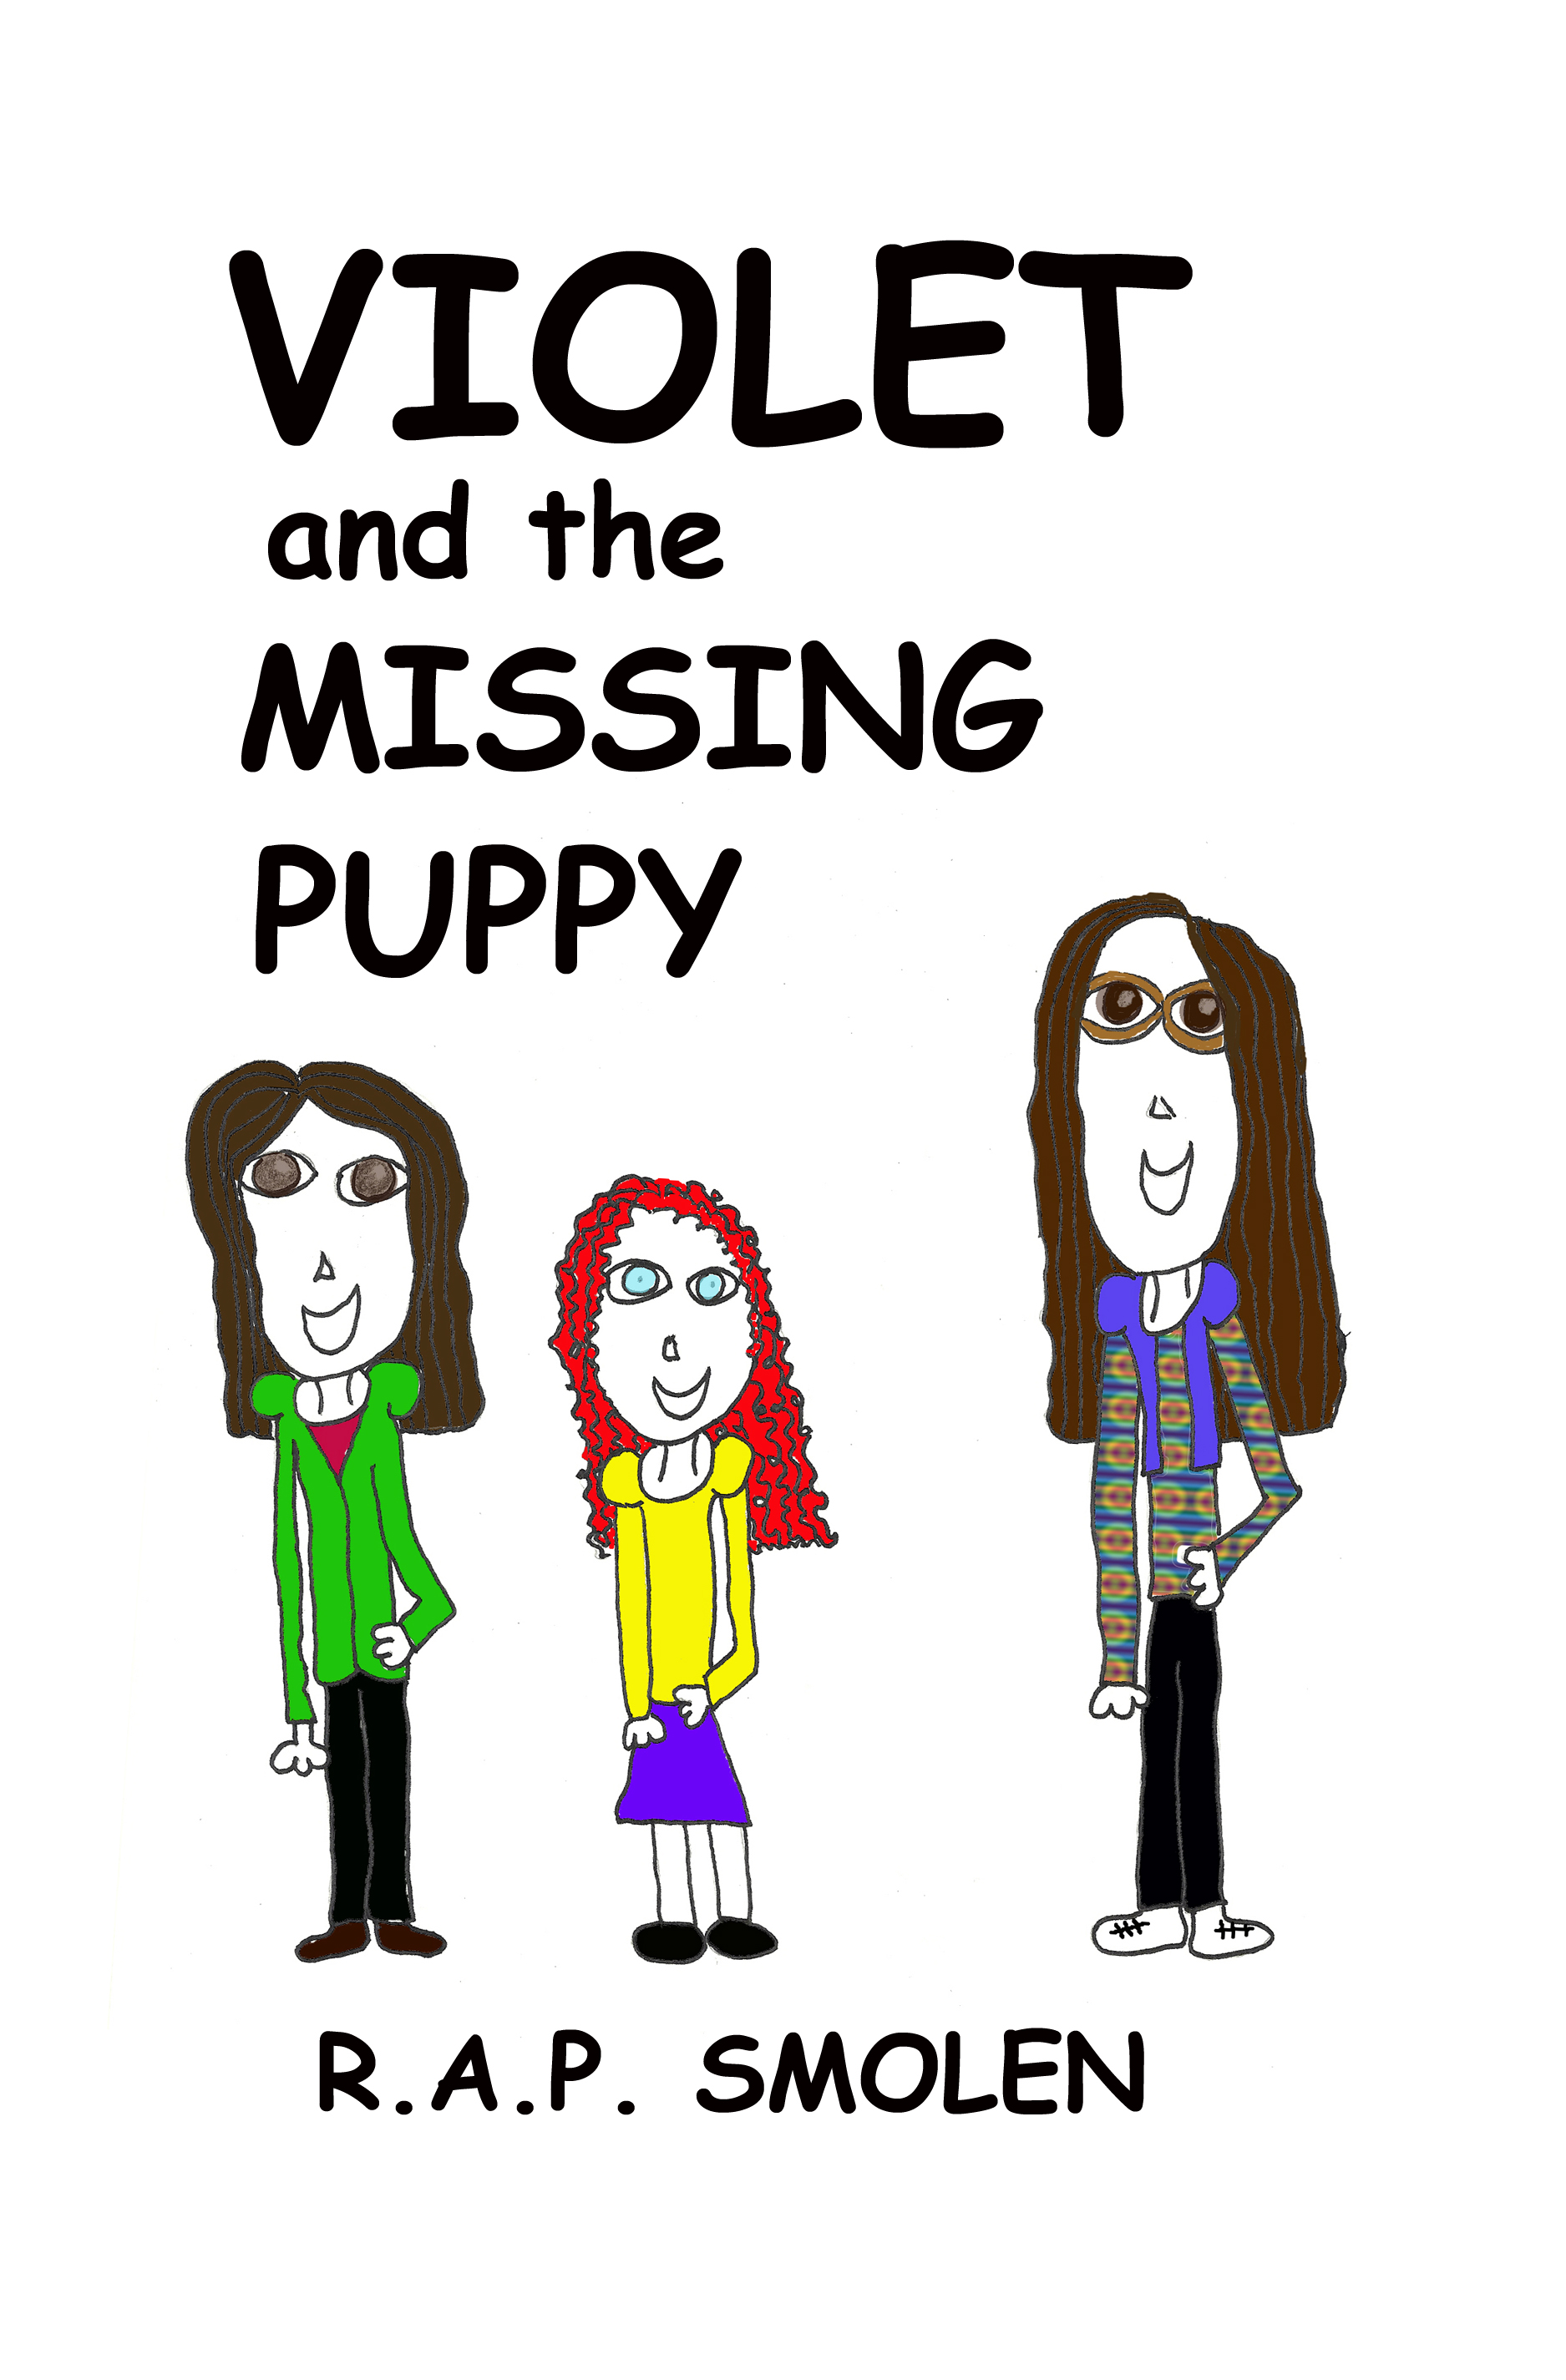 Violet and the Missing Puppy